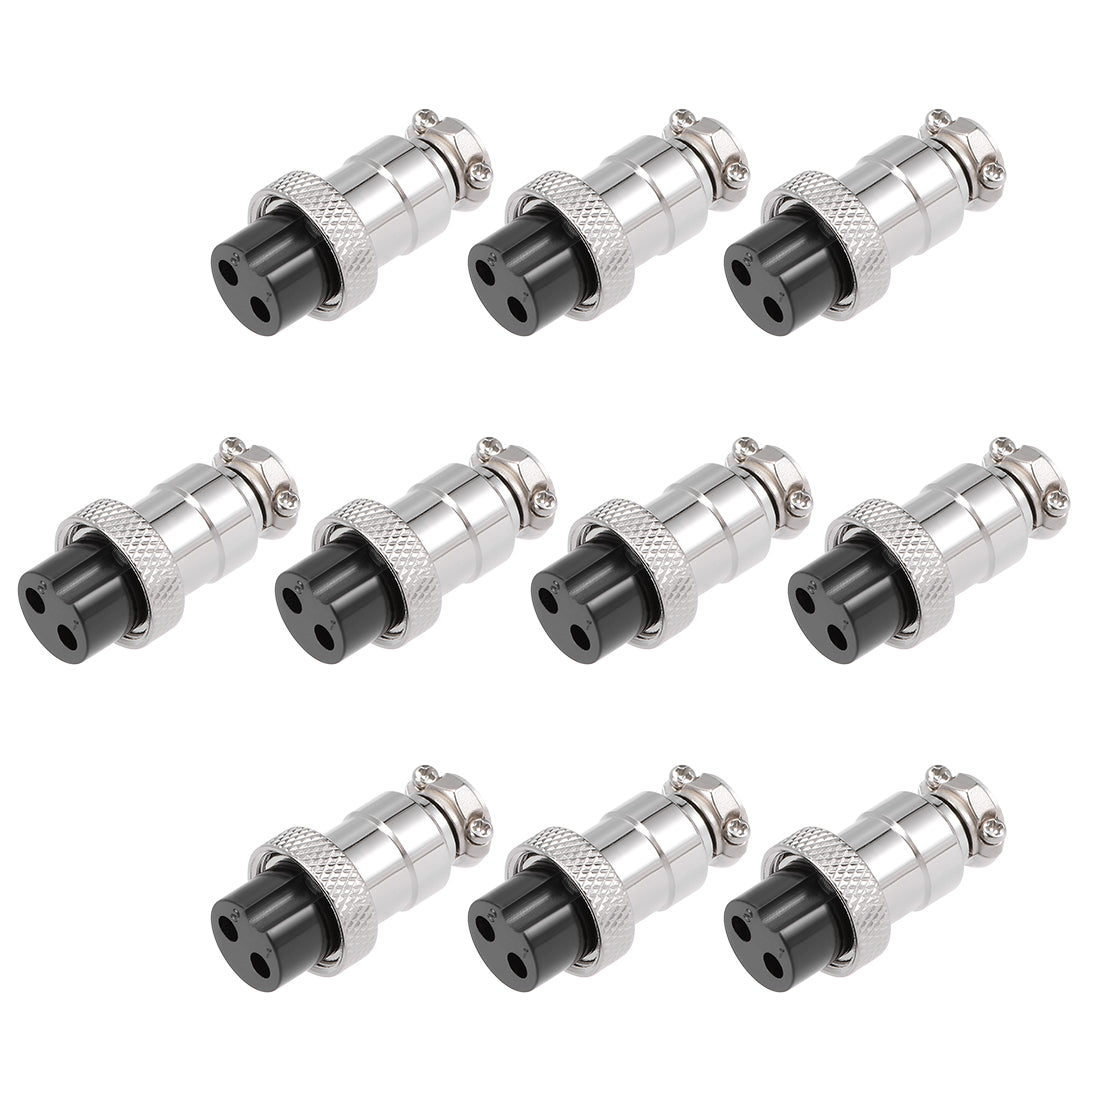 uxcell Uxcell 10PCS Aviation Connector 16mm 2P 7A 125V DF16 Waterproof Female Wire Panel Power Chassis Metal Fittings Connector Aviation Silver Tone